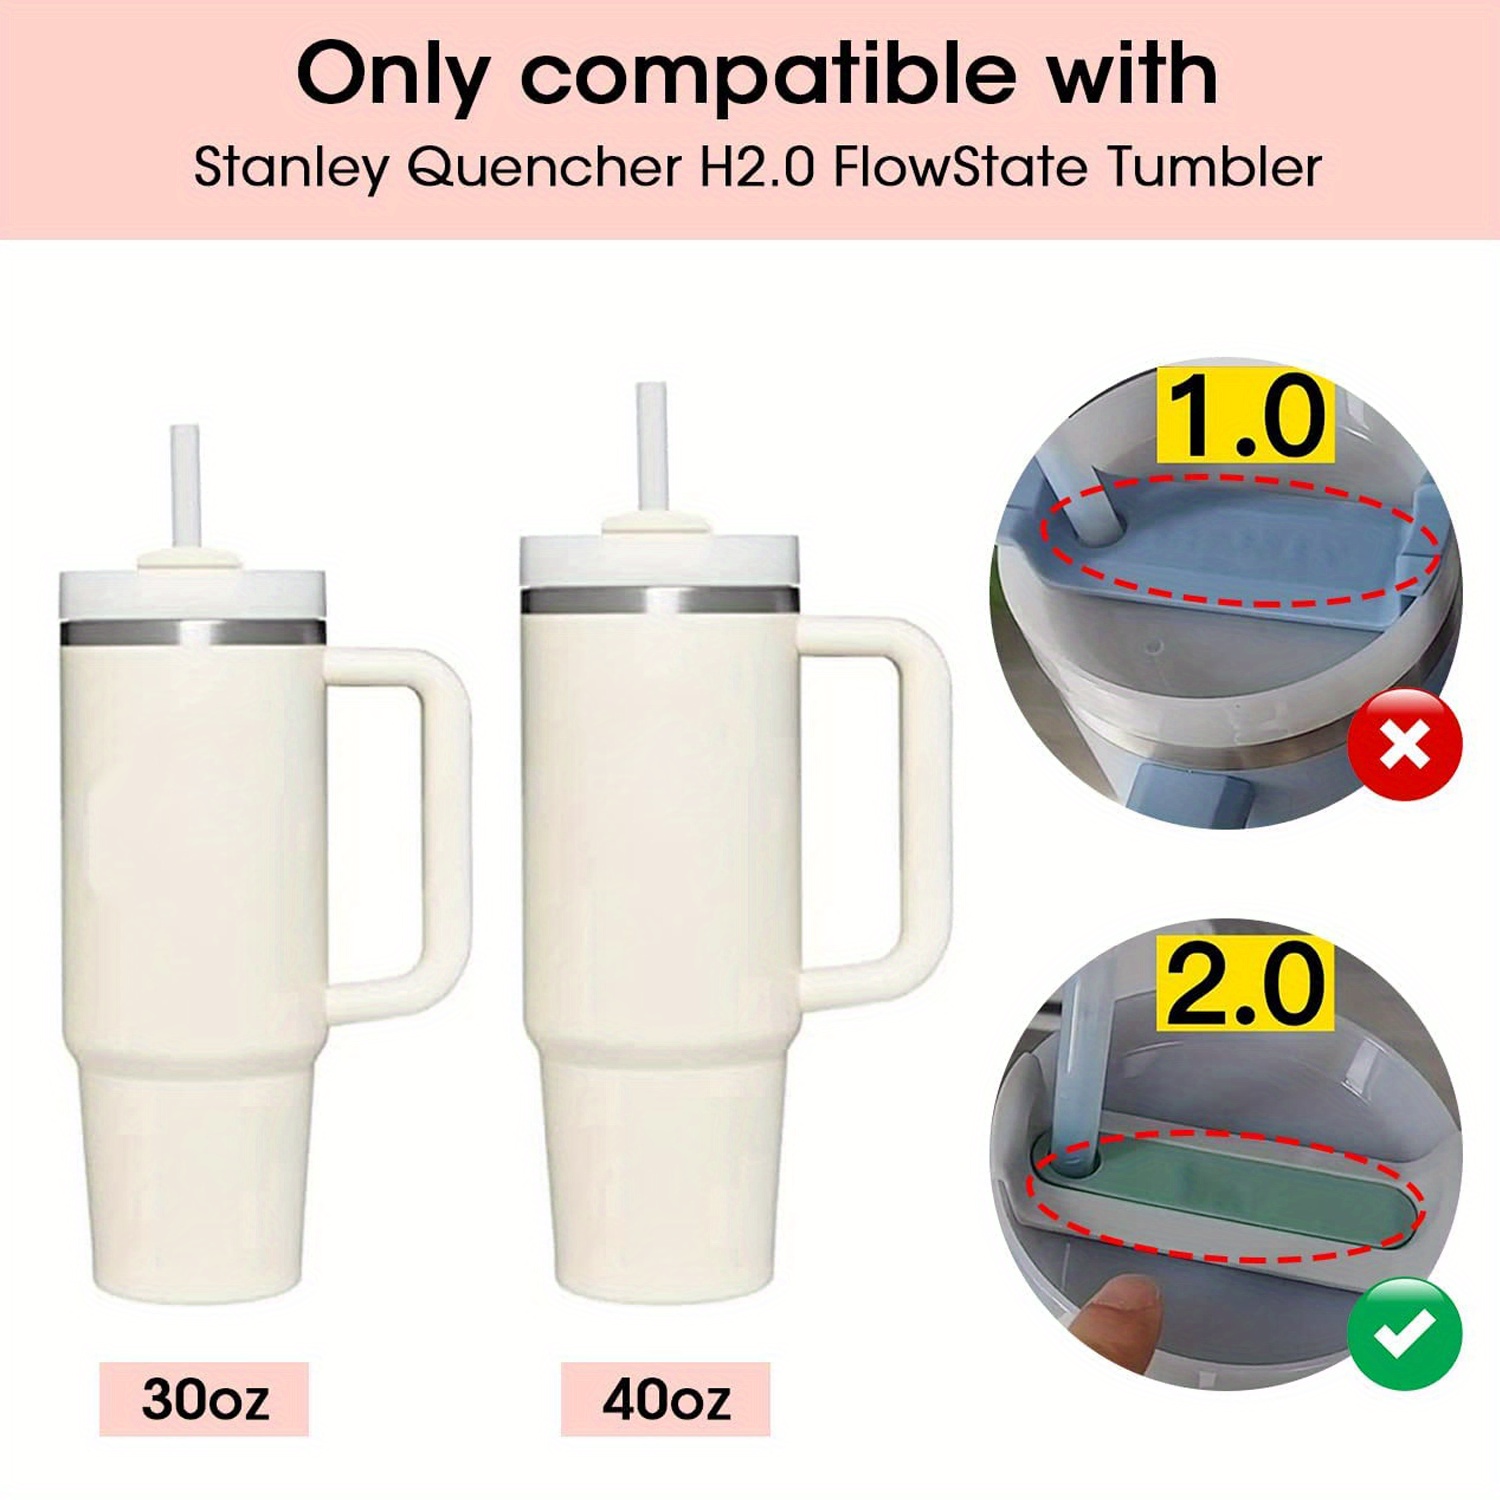 3Pcs Silicone Spill Proof Stopper Set for Stanley Cup 1.0 40oz/30oz Tumbler  Leakproof Water Bottle L…See more 3Pcs Silicone Spill Proof Stopper Set